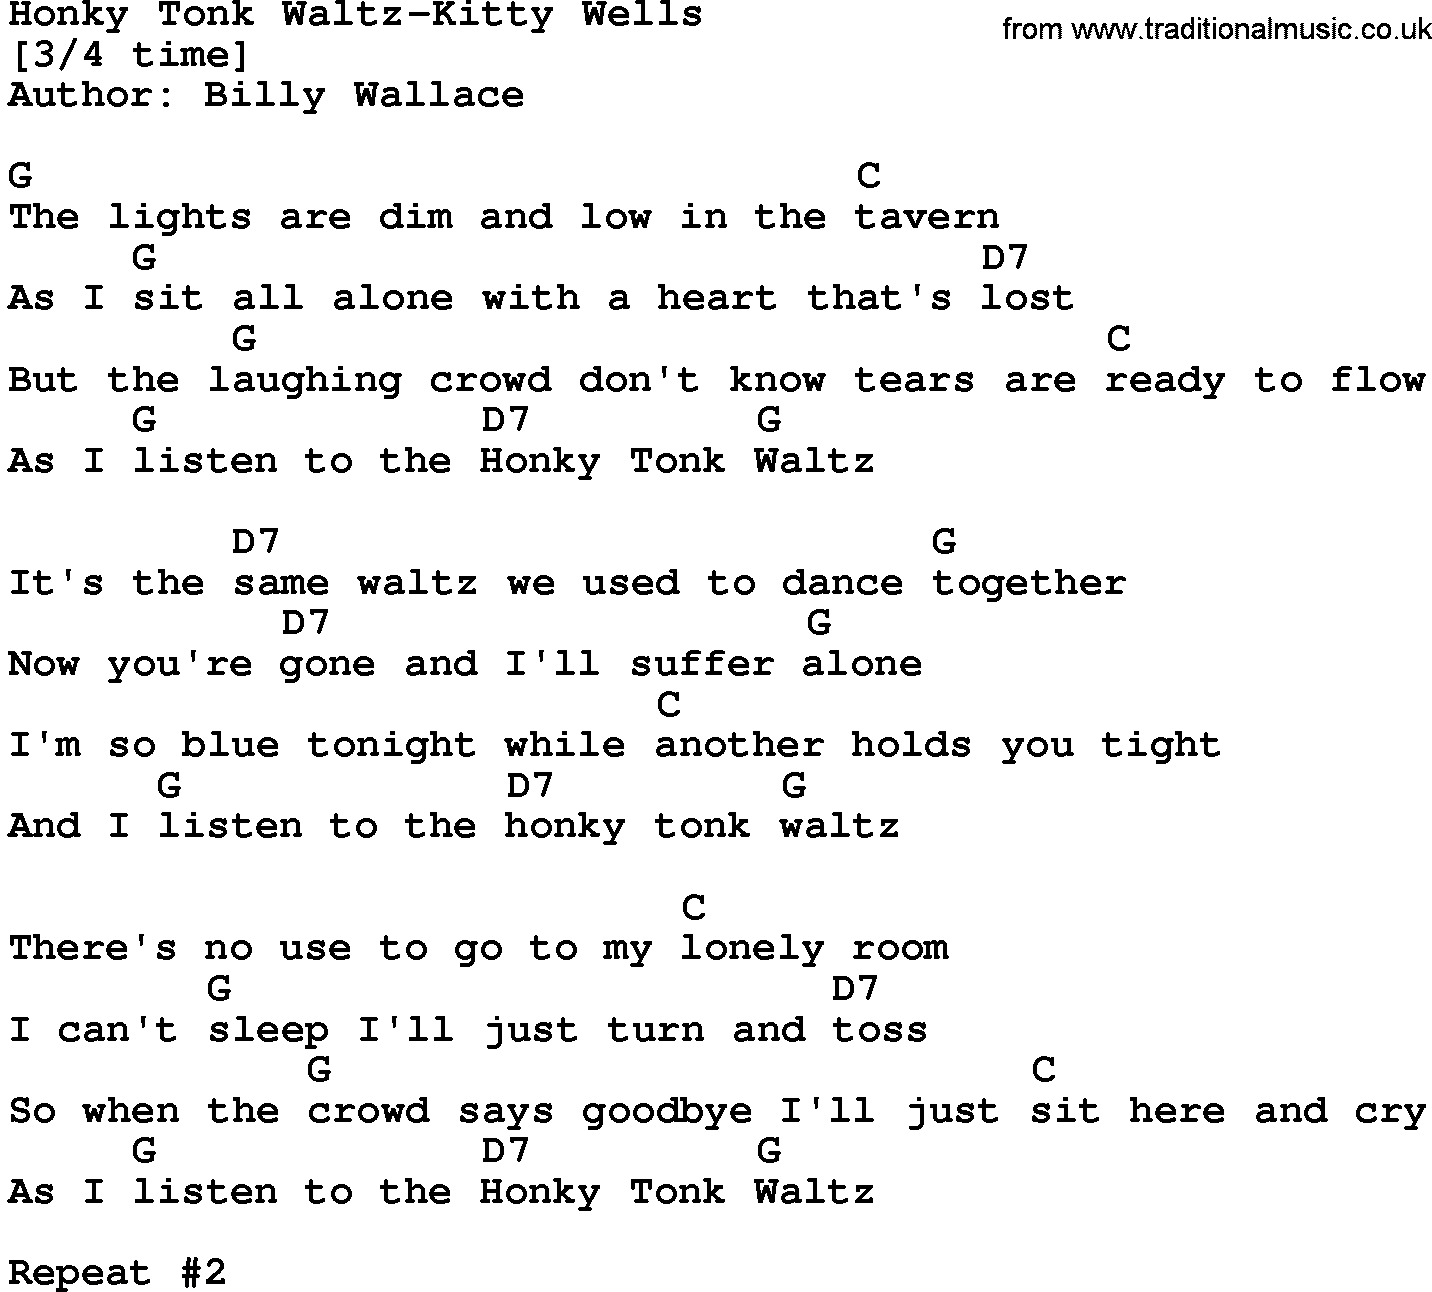 Country music song: Honky Tonk Waltz-Kitty Wells lyrics and chords